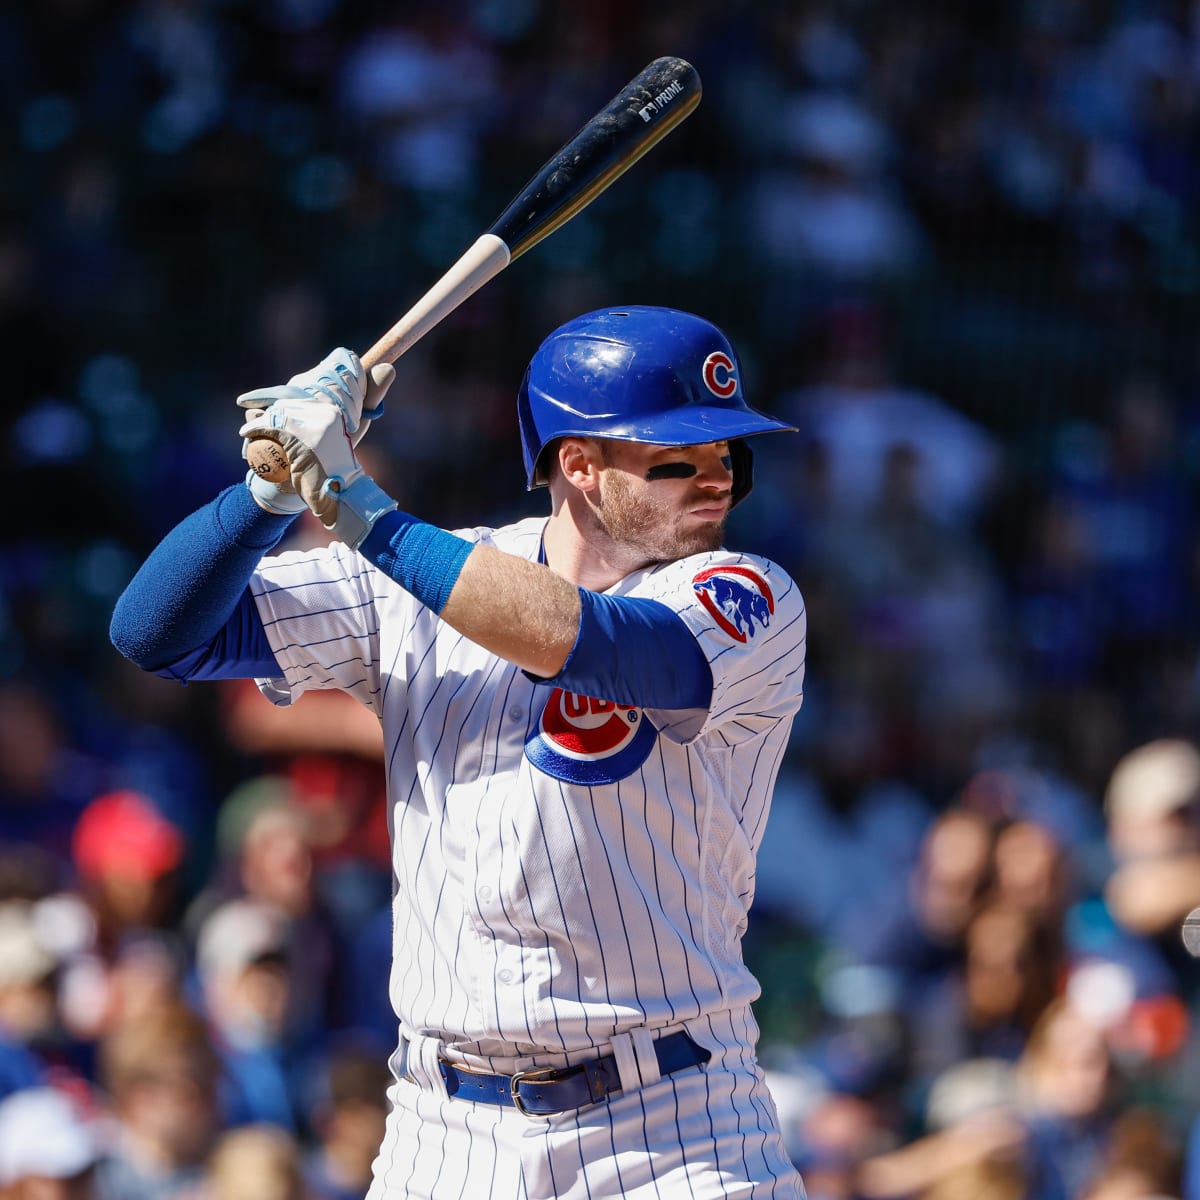 Cubs: Ian Happ calls out fans at Target Field for throwing Skittles at him